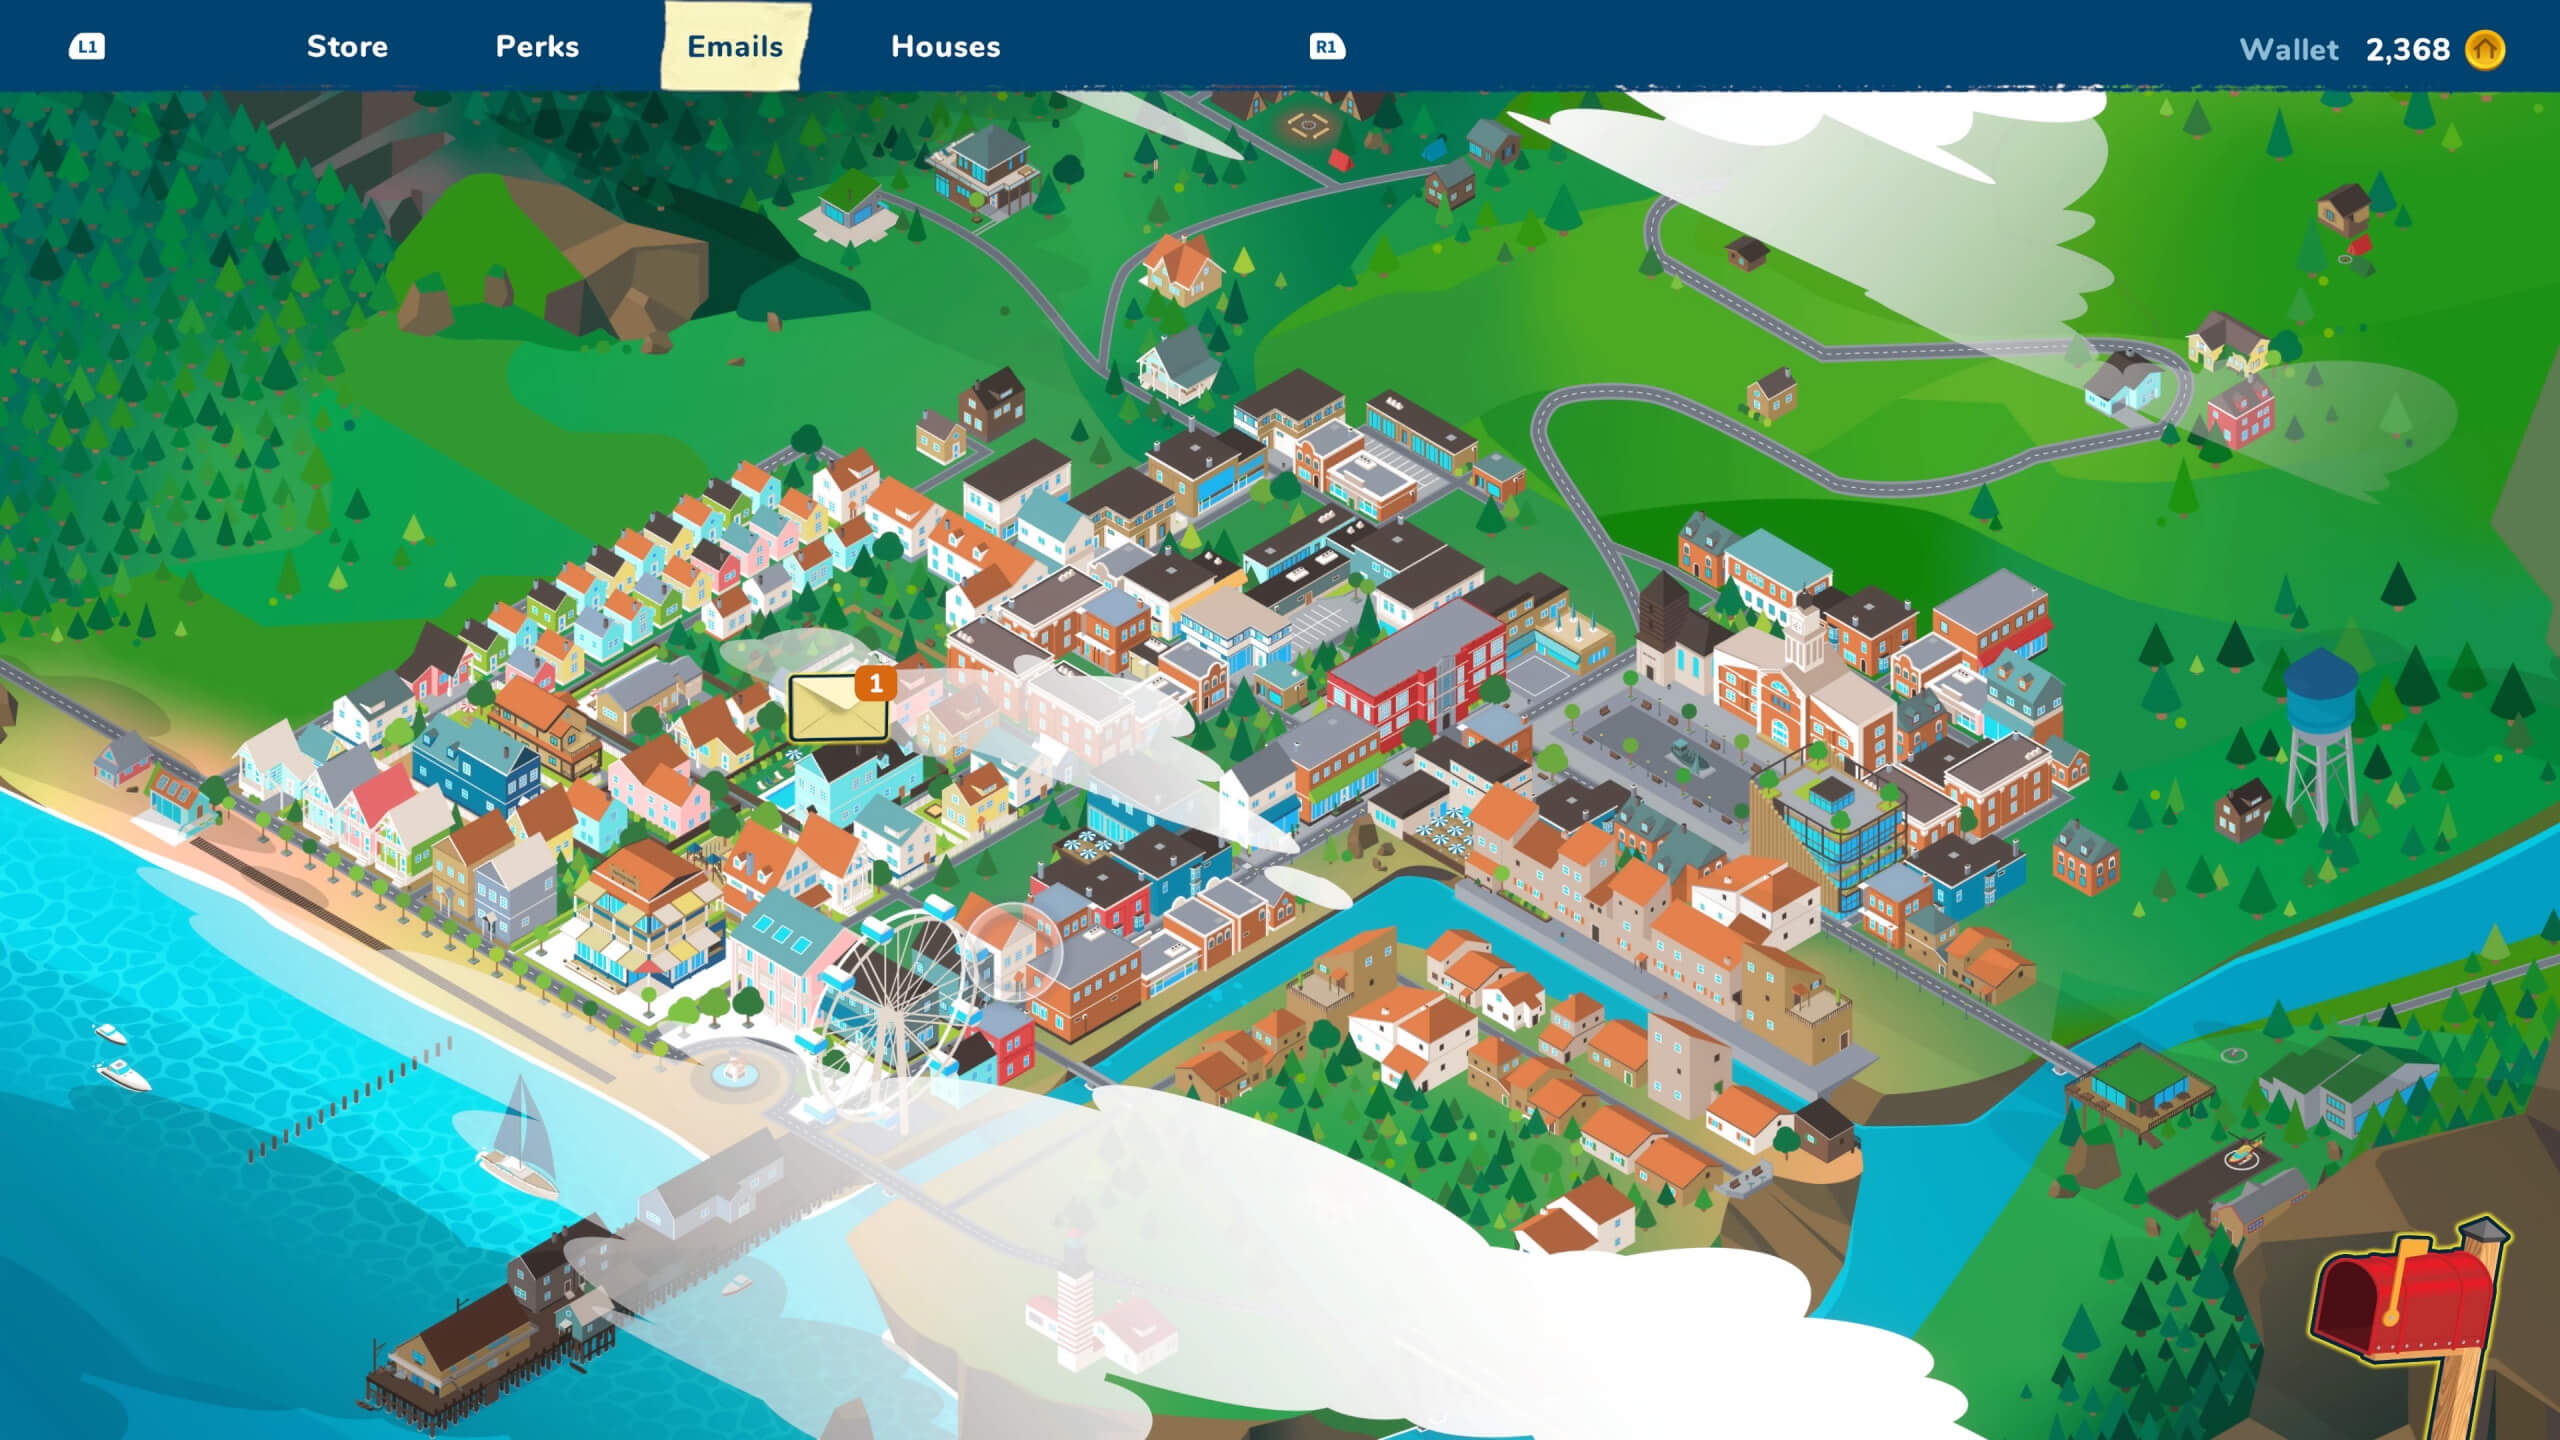 This shows the map of Pinnacove. There are clouds in the sky and below is multiple houses. At the top of the picture is a blue bar with different options and the amount of money in the players wallet.